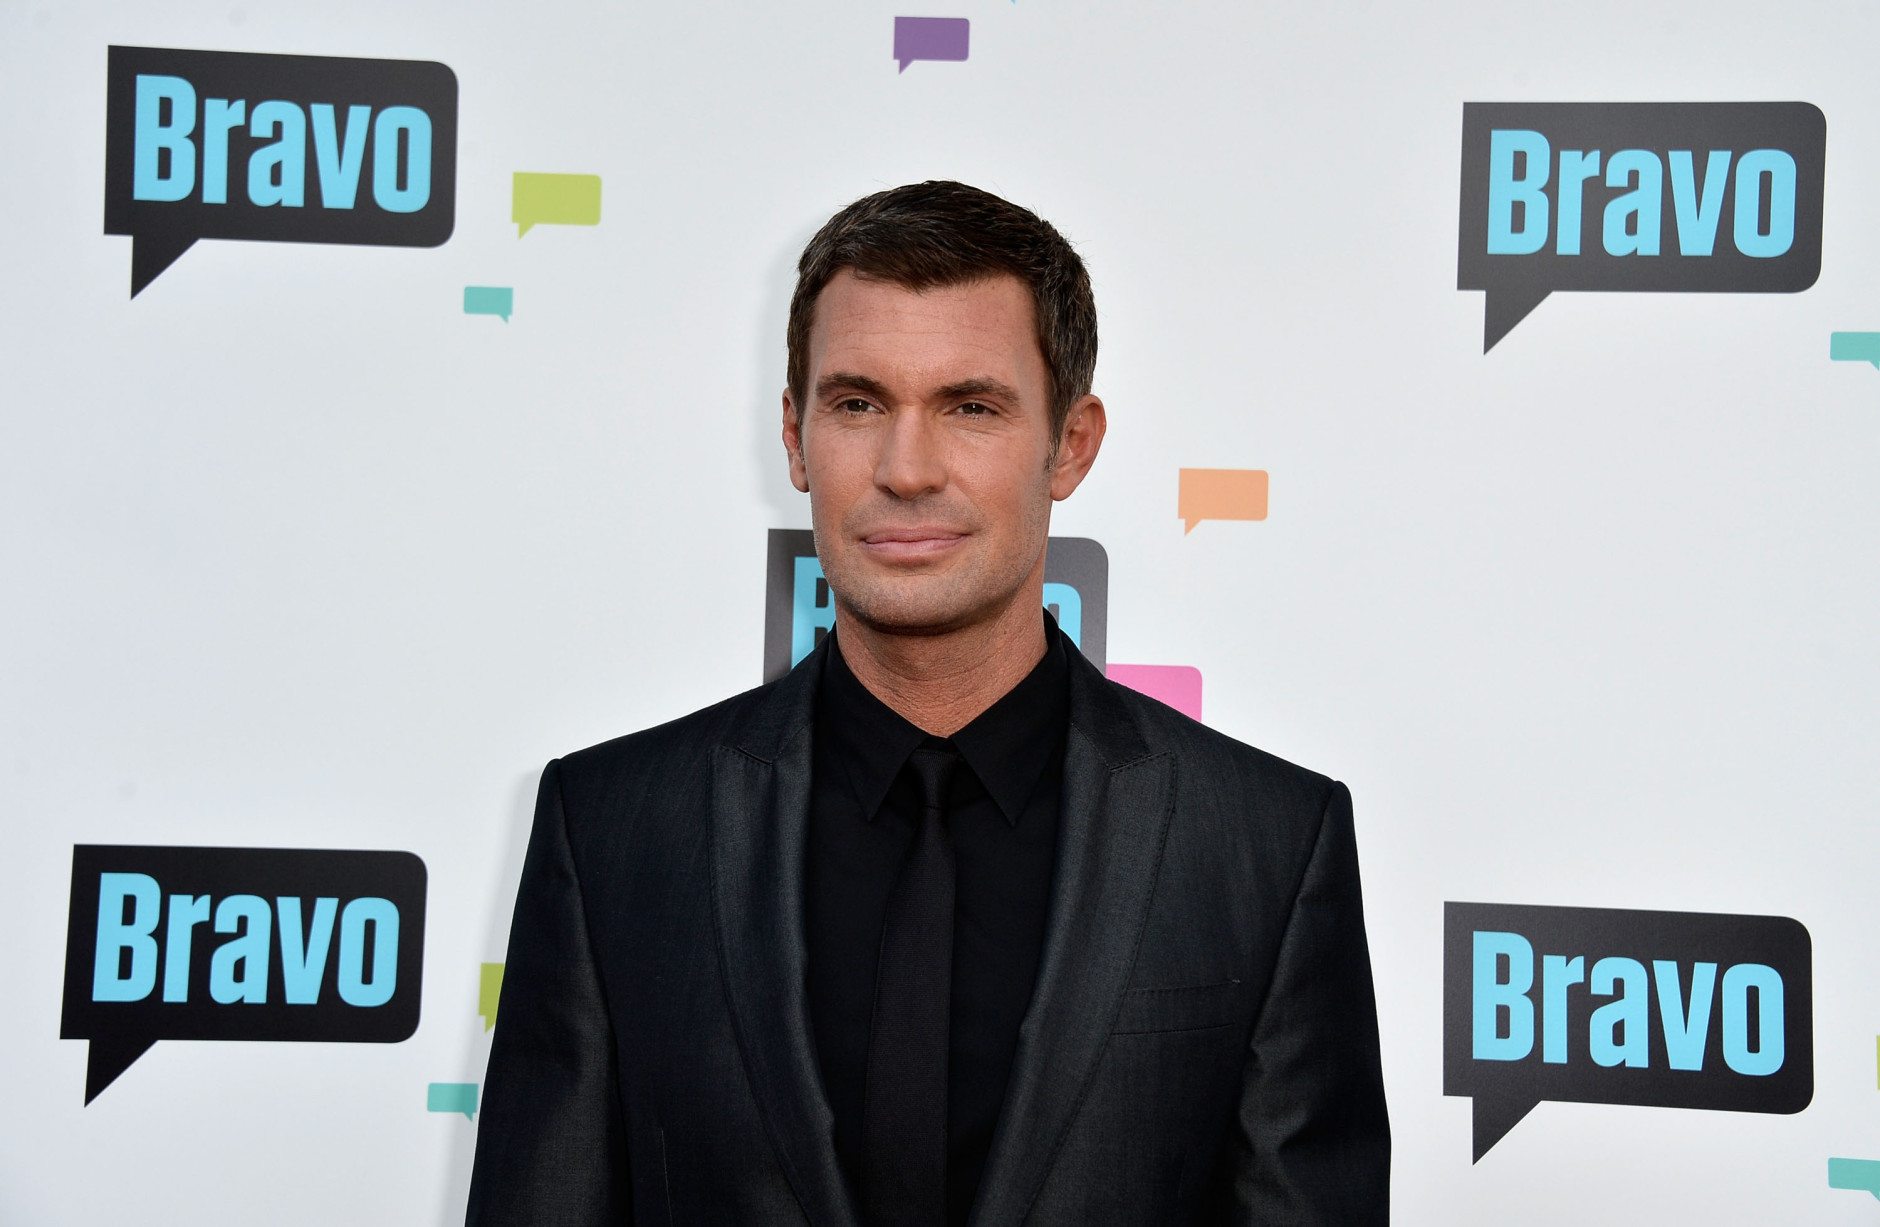 NORTH HOLLYWOOD, CA - MAY 22:  Television Personality Jeff Lewis arrives at Bravo Media's 2013 "For Your Consideration" Emmy Event at Leonard H. Goldenson Theatre on May 22, 2013 in North Hollywood, California.  (Photo by Frazer Harrison/Getty Images)